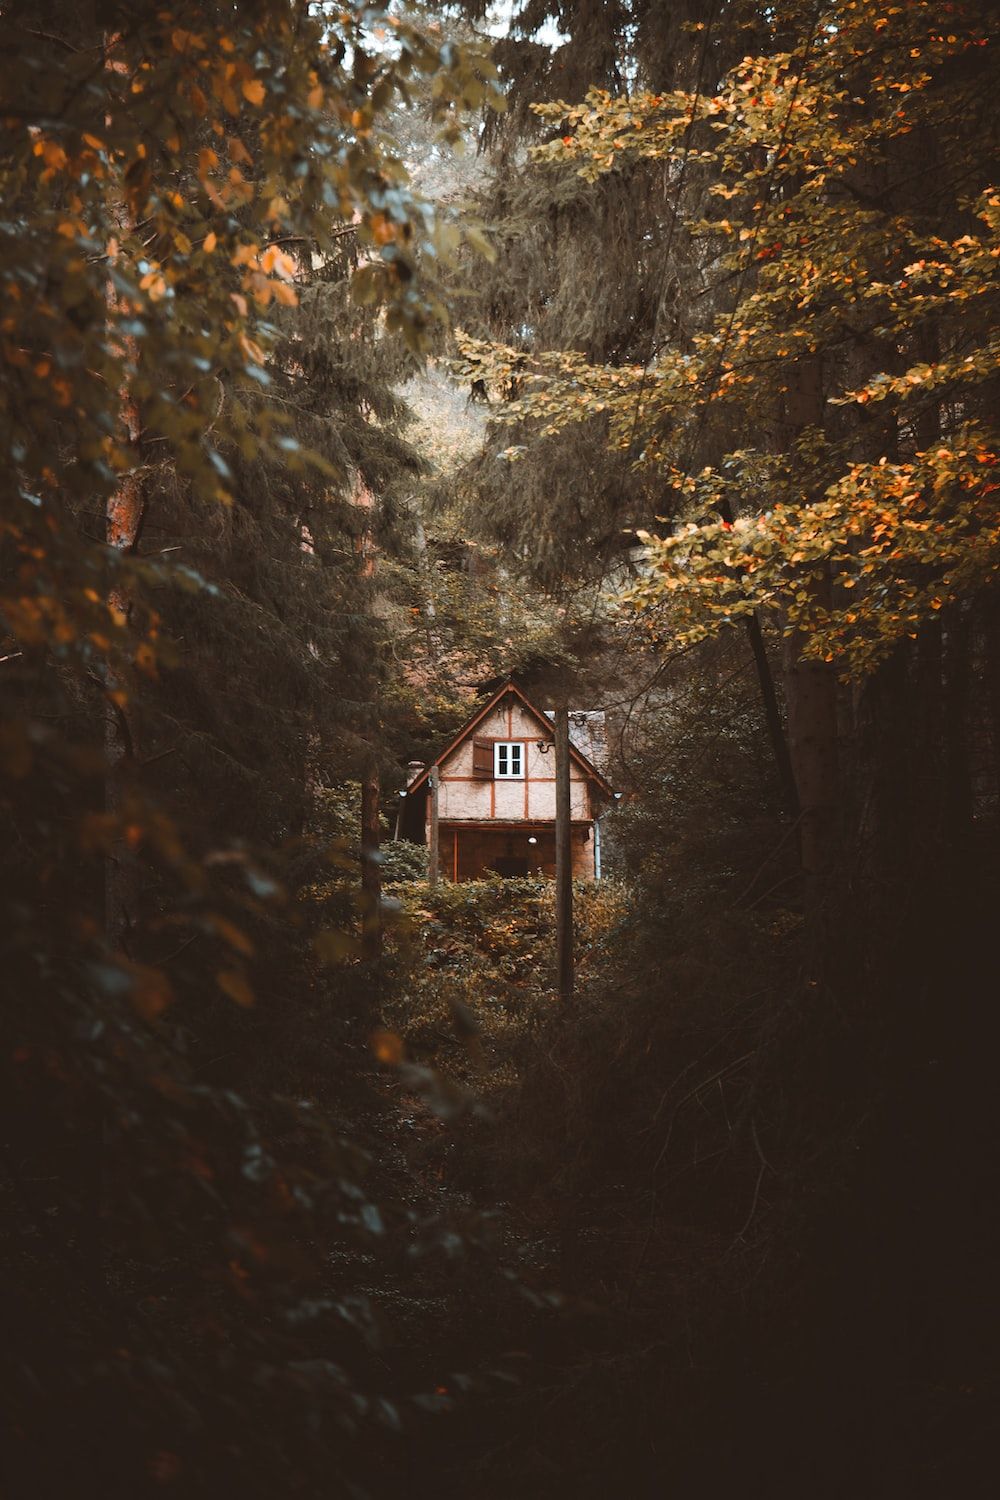 Cabin In Woods Picture. Download Free Image